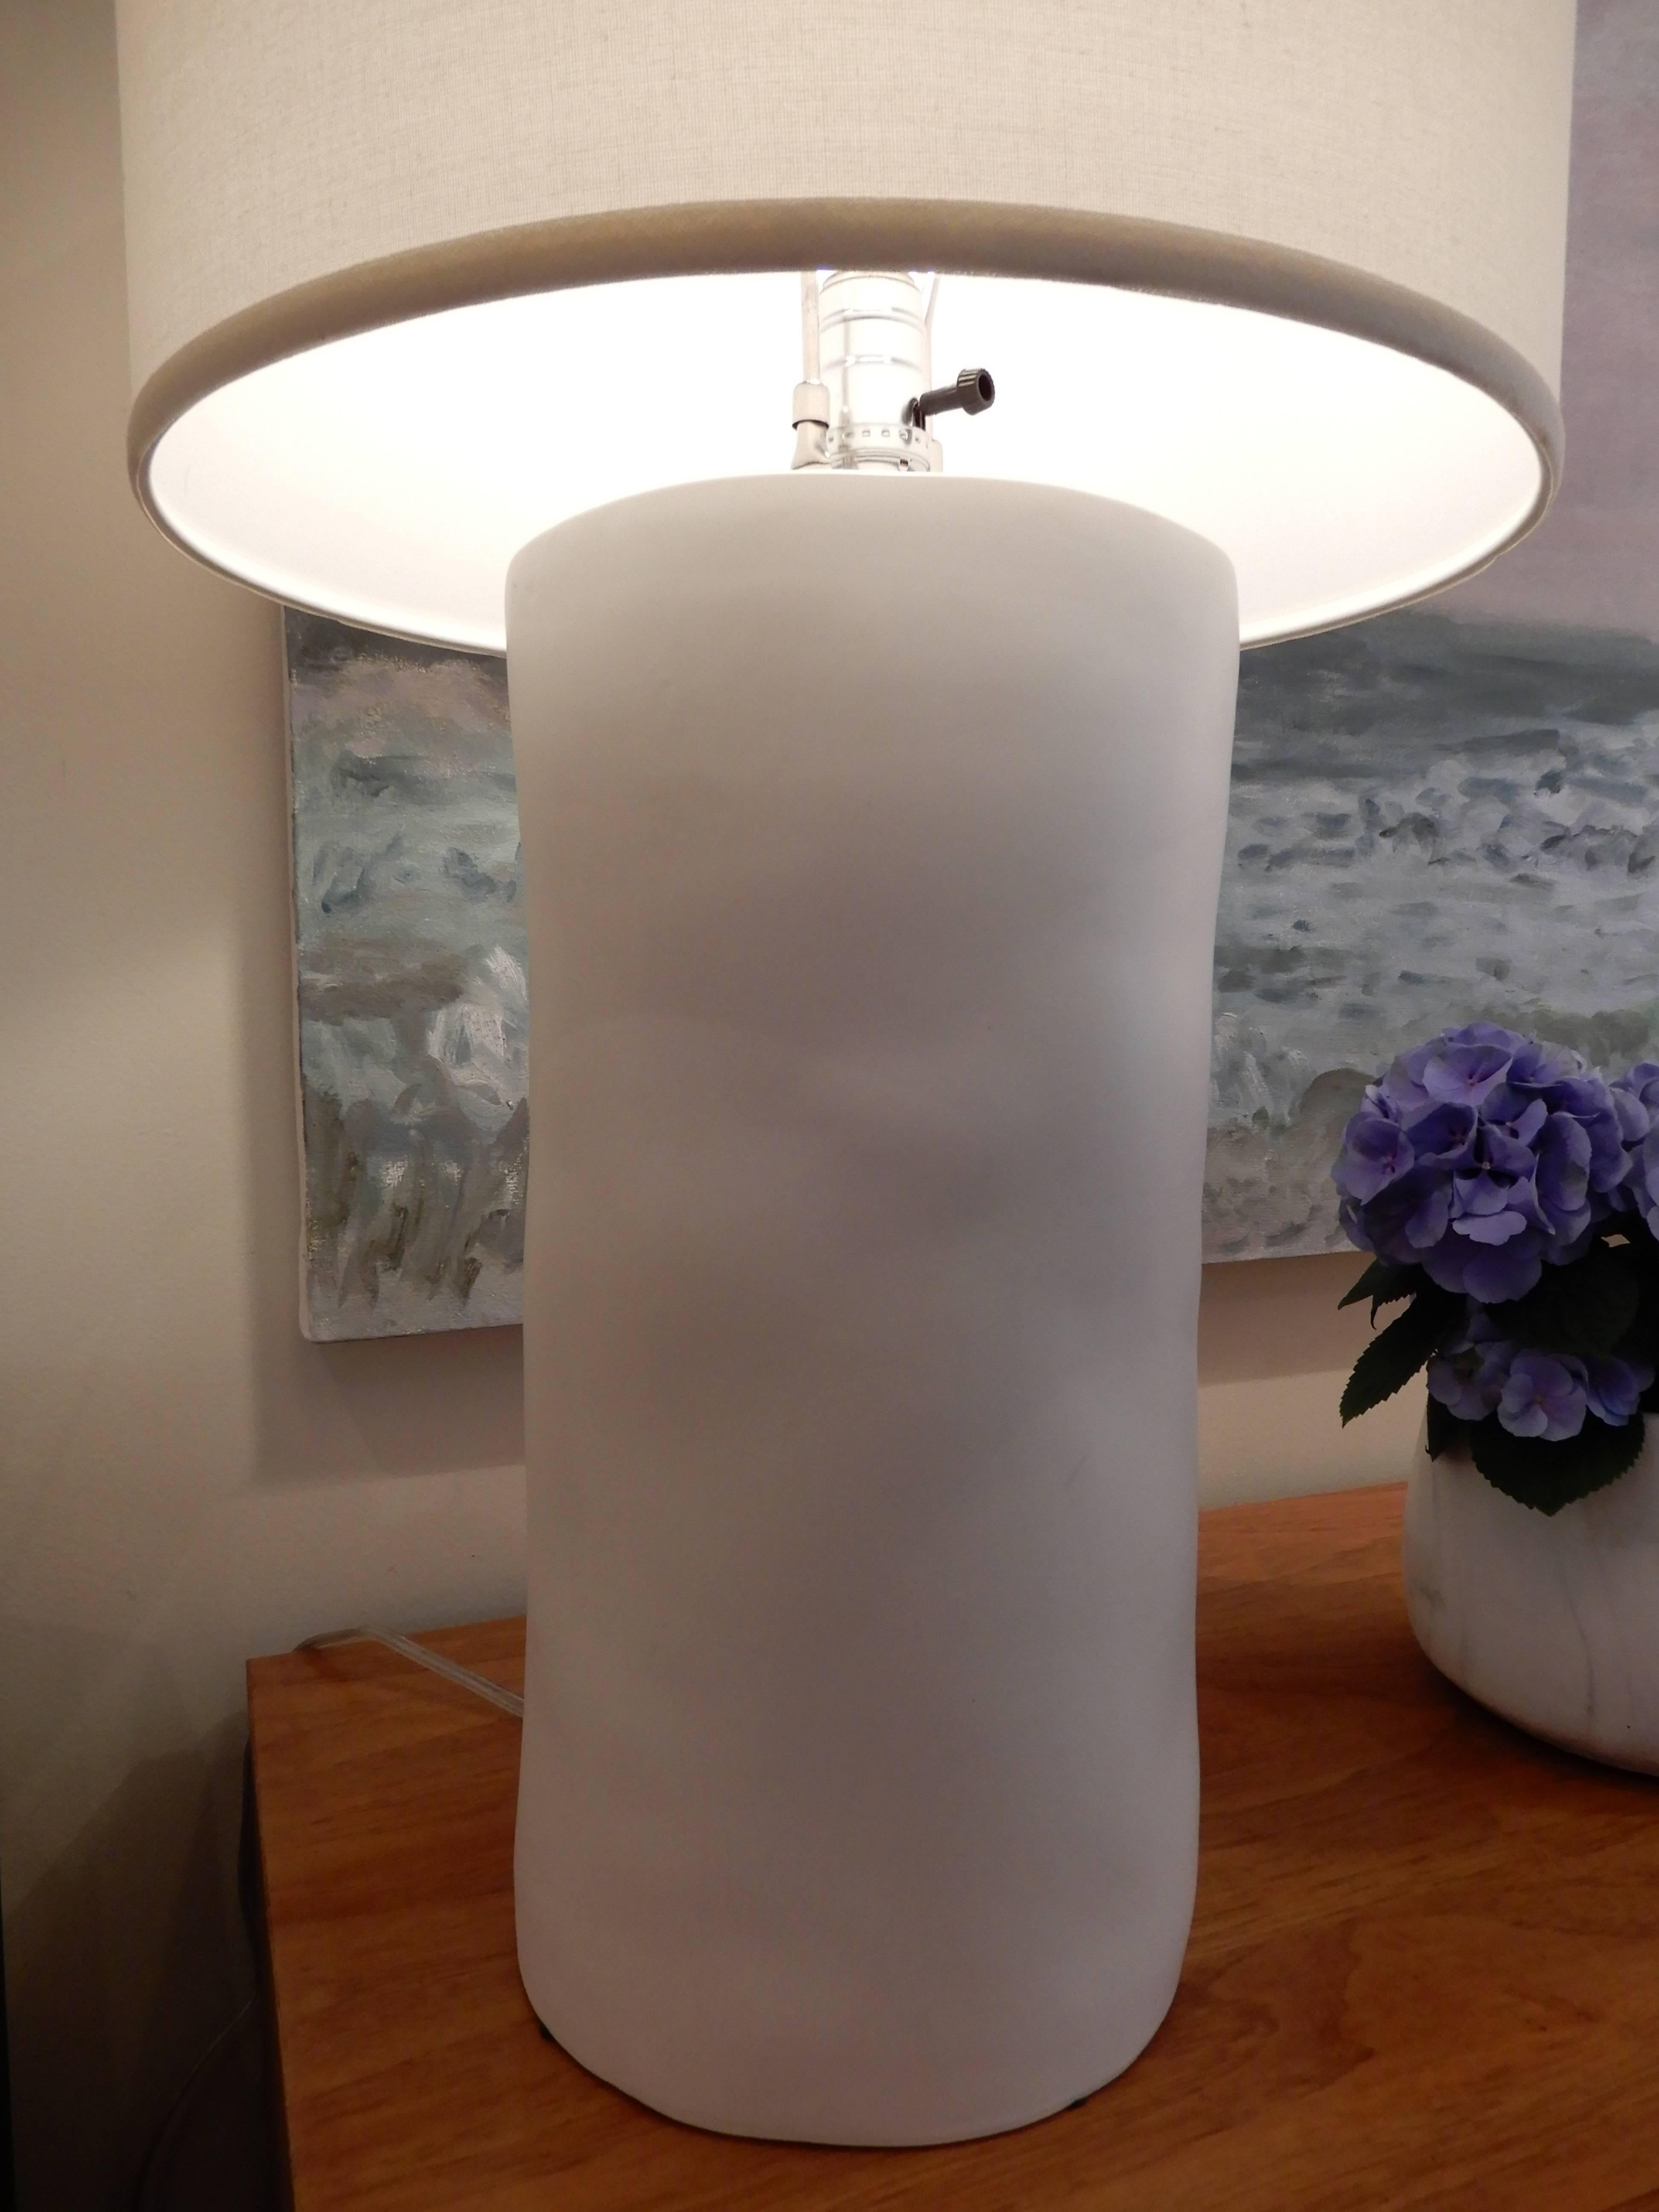 Make a statement with these tall handcrafted white ceramic lamps. Simple and natural lines with an organic texture to them, sold with the tall matching drum shade. Three way switch, two in stock the rest are made to order.